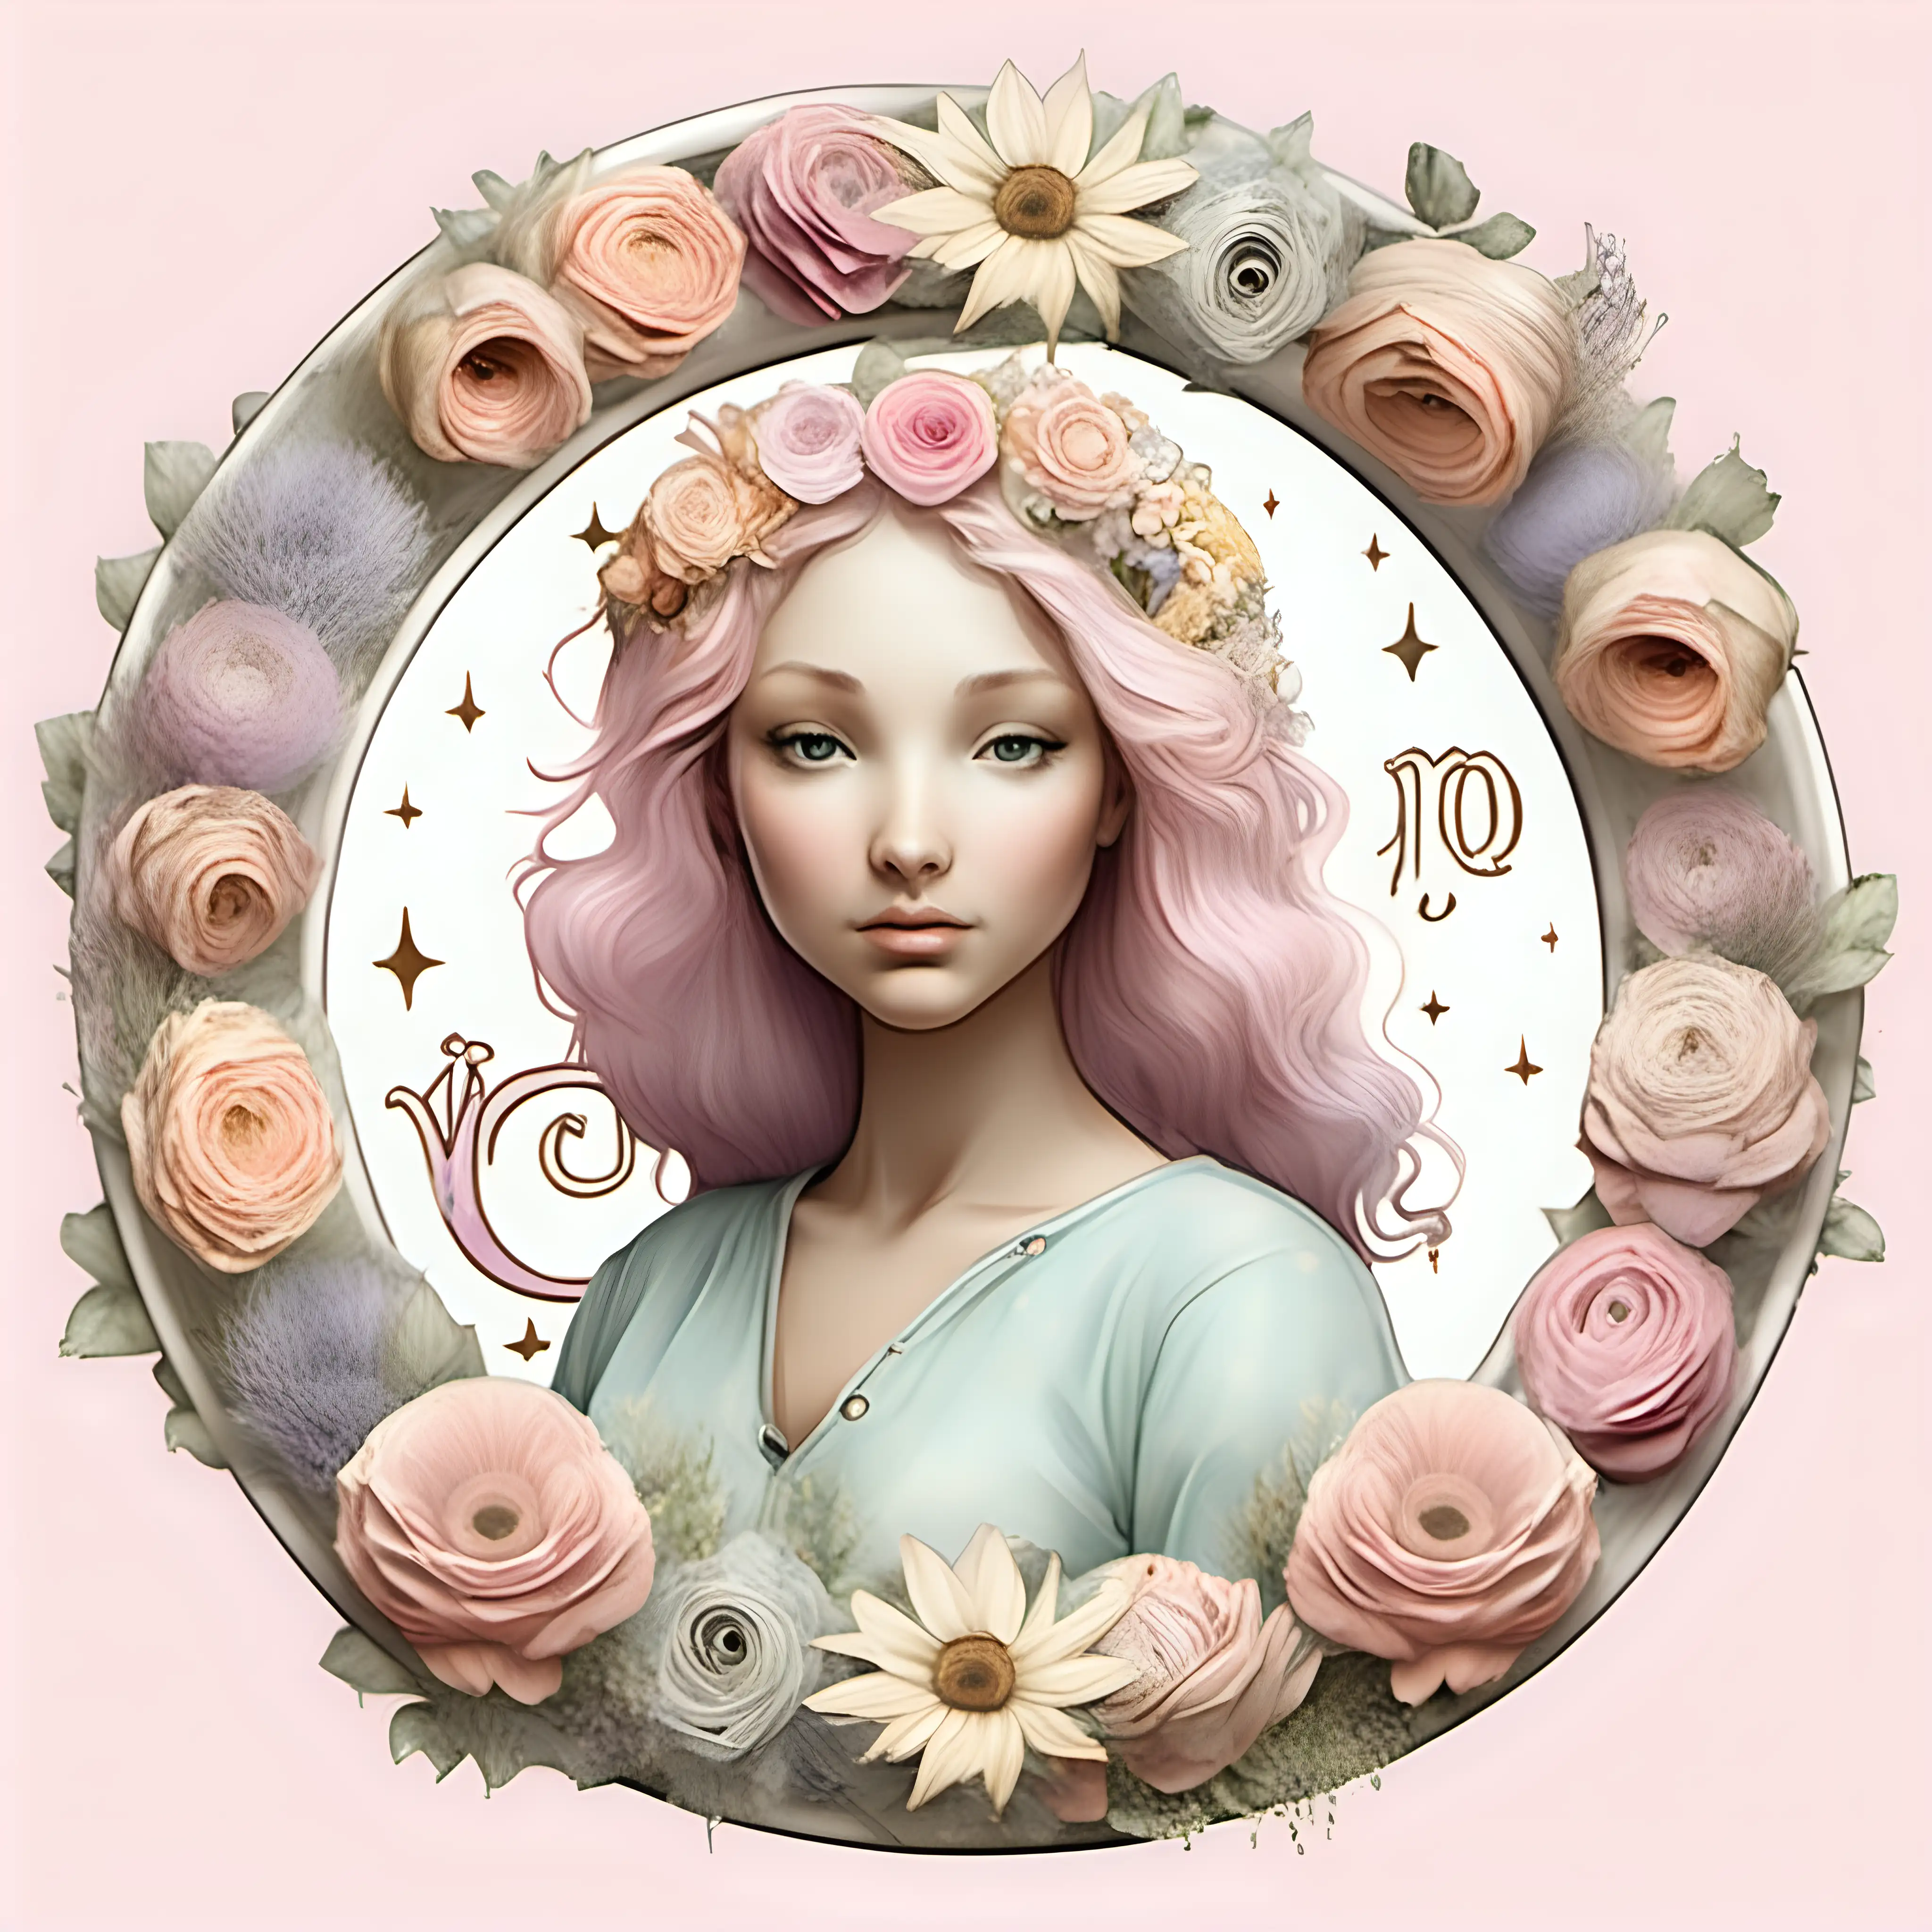 Whimsical Virgo Zodiac Sign with Floral Accents in Pastel Cartoon Style